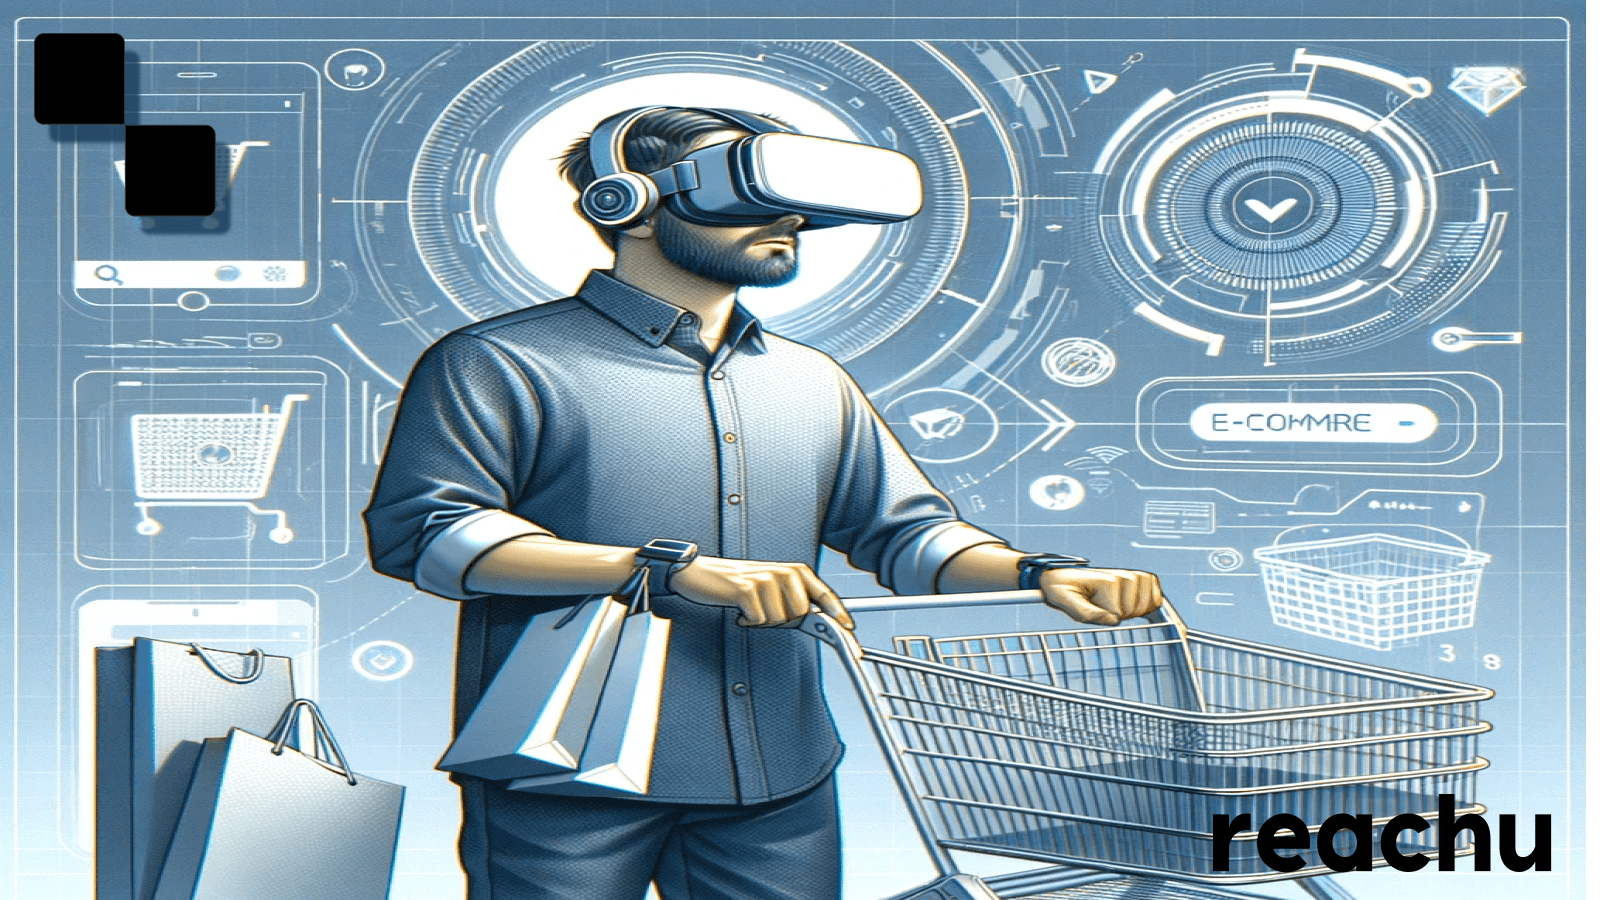 man with VR headset pushing a shopping cart to showcase ecommerce in VR